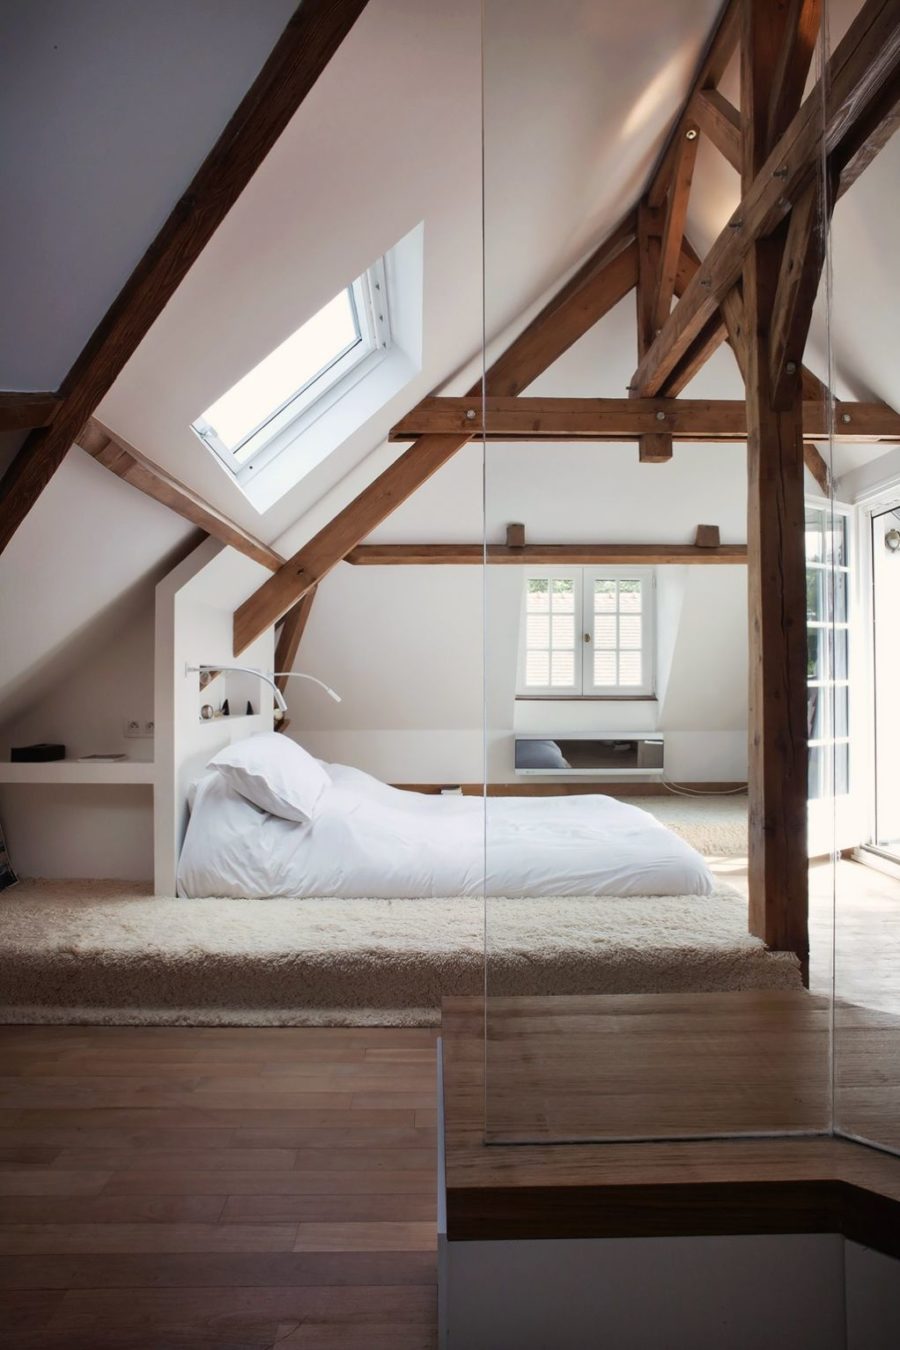 What a cool idea for an attic space. Stained wood beams are a grand measure that really helps get that wow-effect.